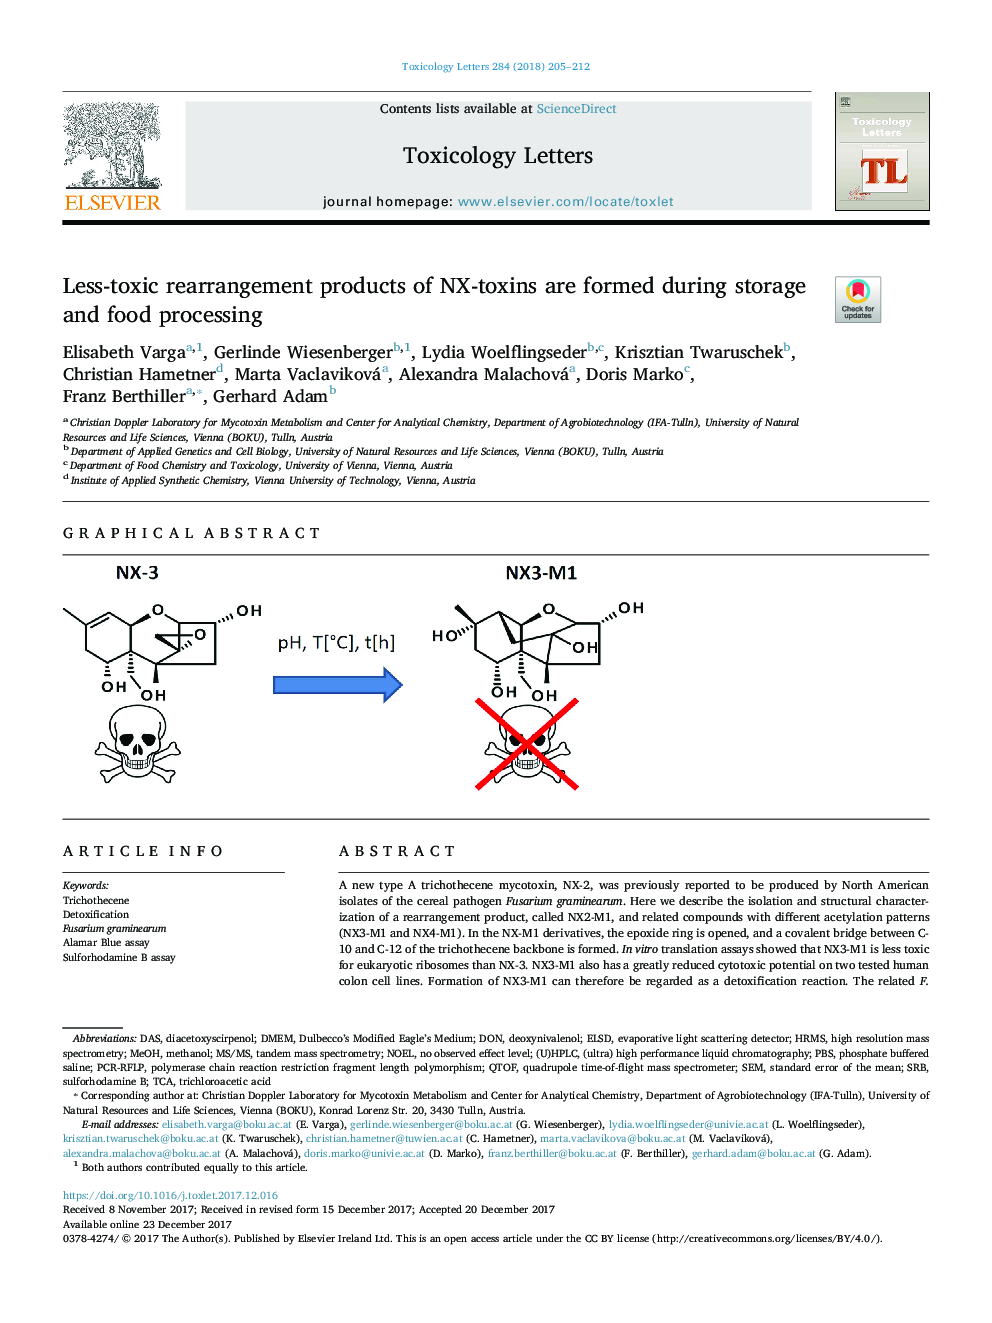 Less-toxic rearrangement products of NX-toxins are formed during storage and food processing